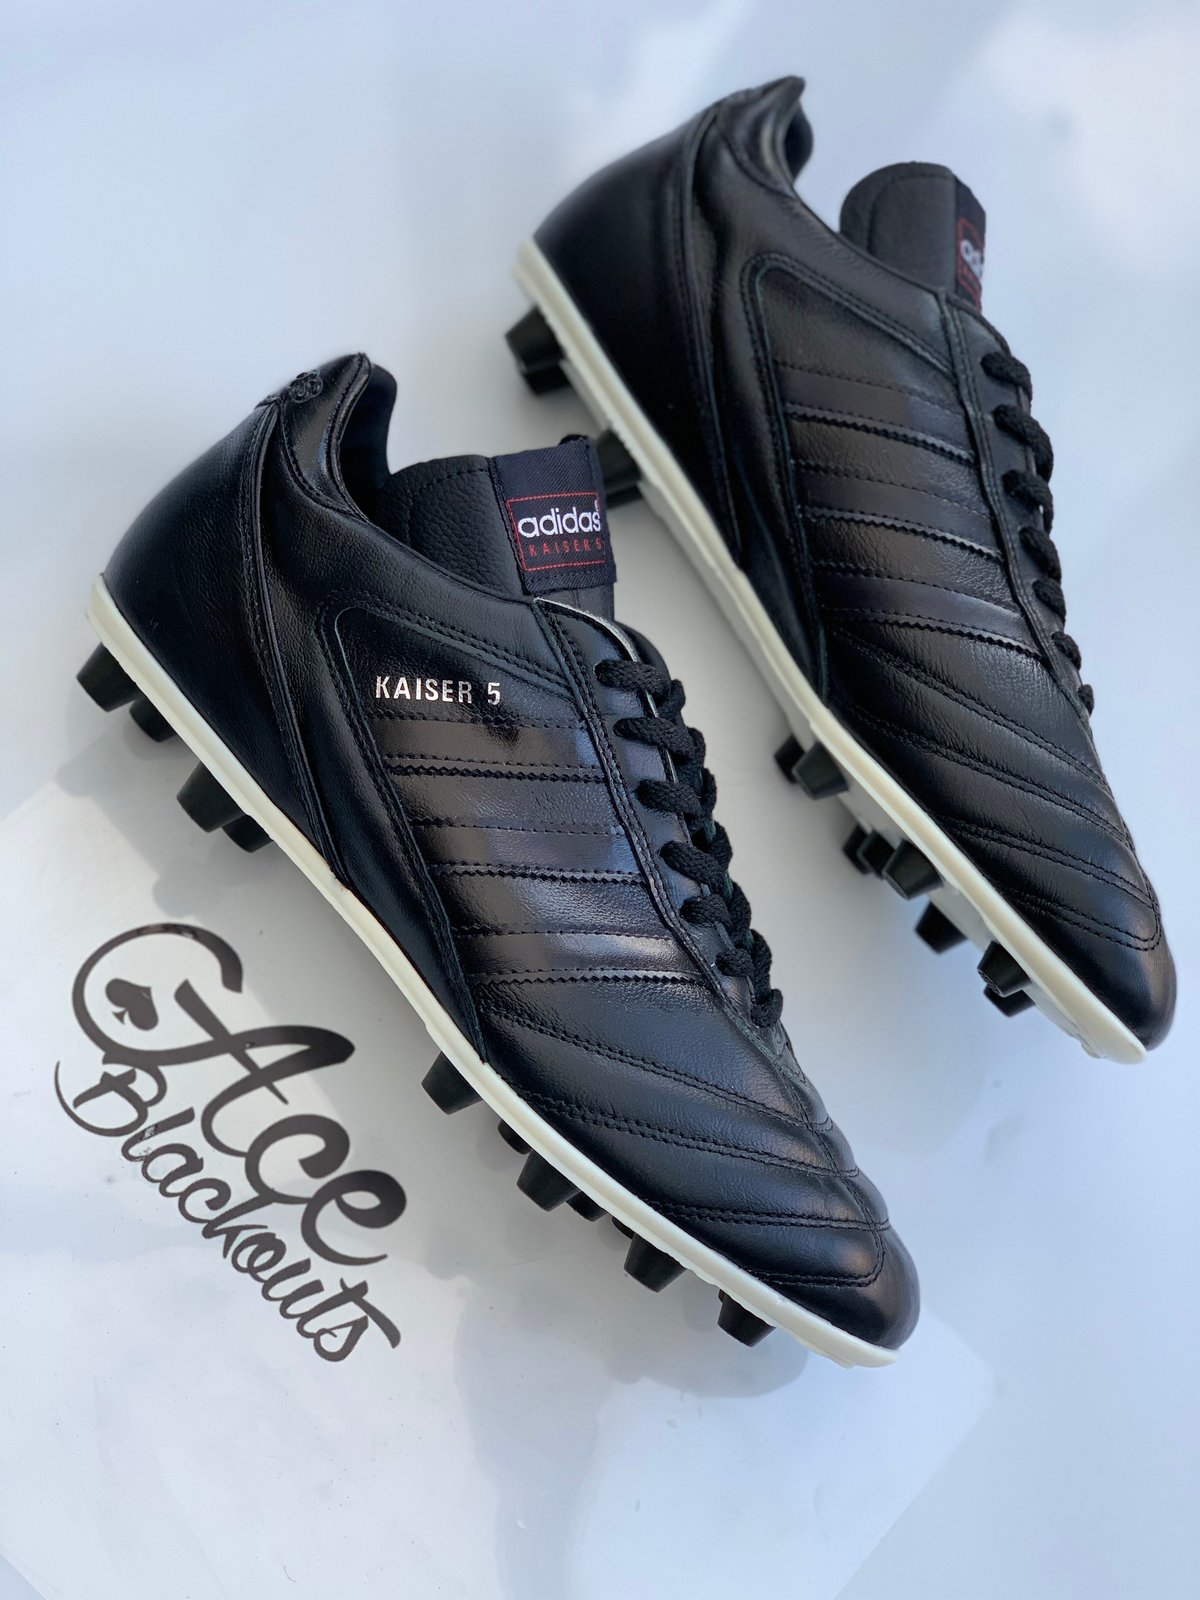 adidas kaiser moulded boots